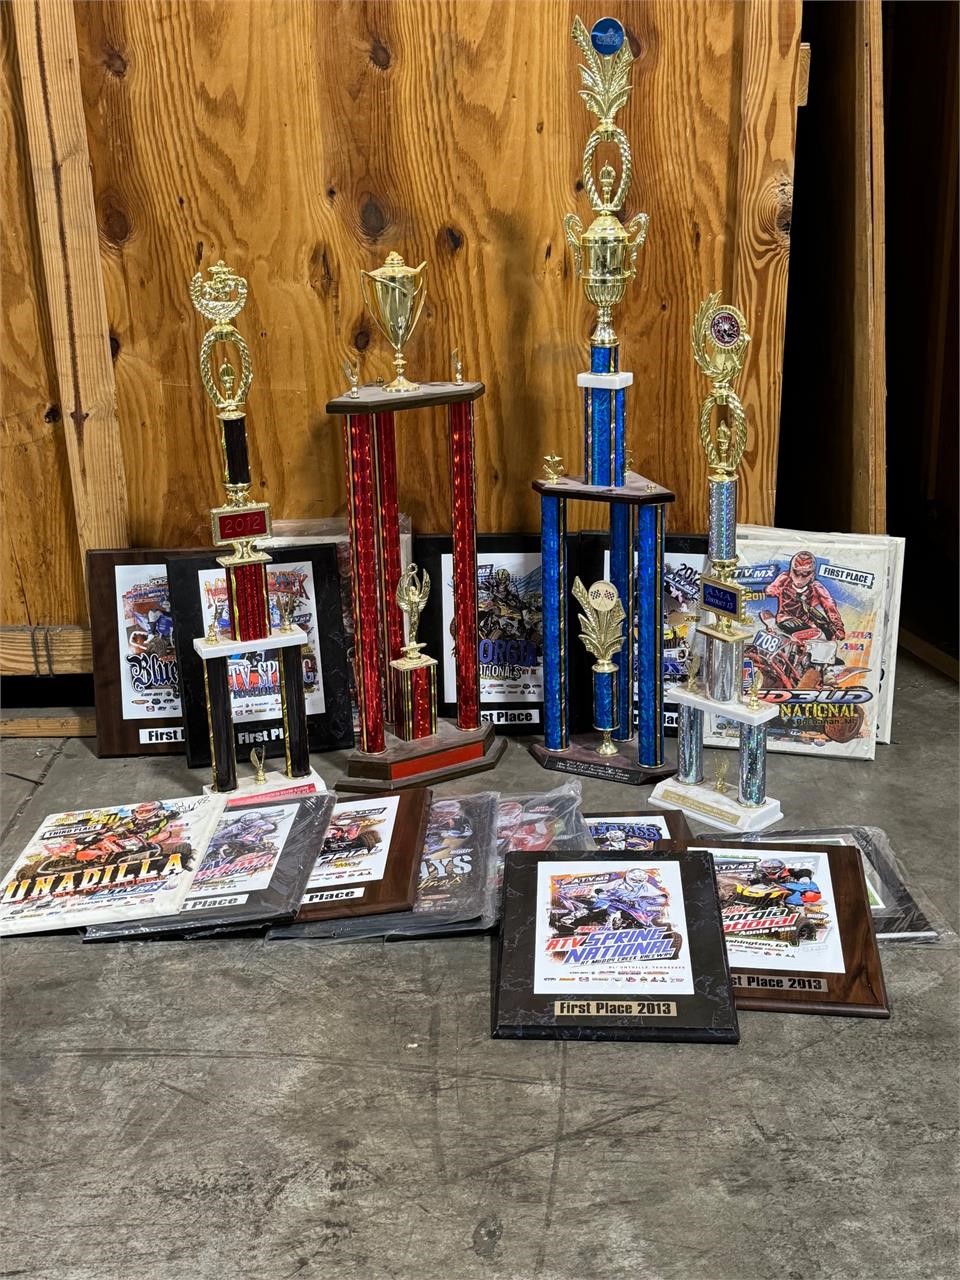 Four wheeler racing trophies and plaques